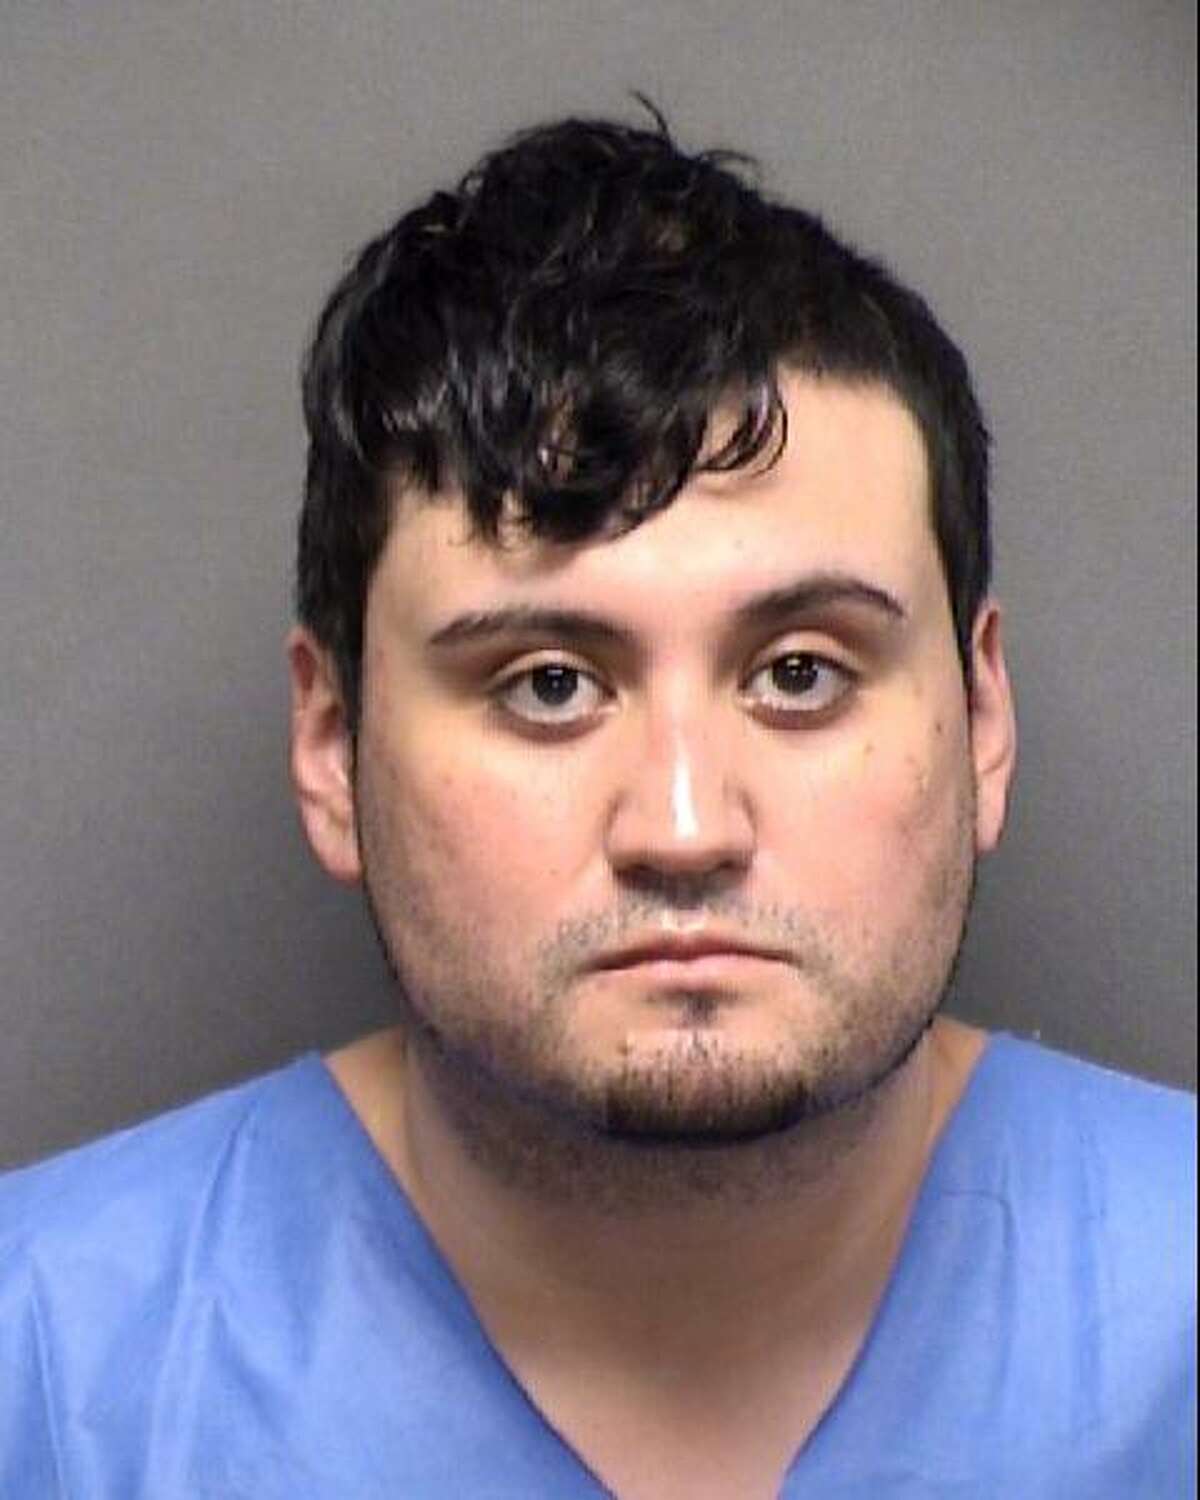 Ryan Paul Ramos, 31, was arrested Sunday, May 24, 2020, and charged with aggravated kidnapping and aggravated sexual assault. He is accused of abducting a 14-year-old girl at gunpoint on Saturday, May 23, and taking her to the 6200 block of Vance Jackson Road where Bexar County Sheriff's Office investigators said he sexually assaulted her.